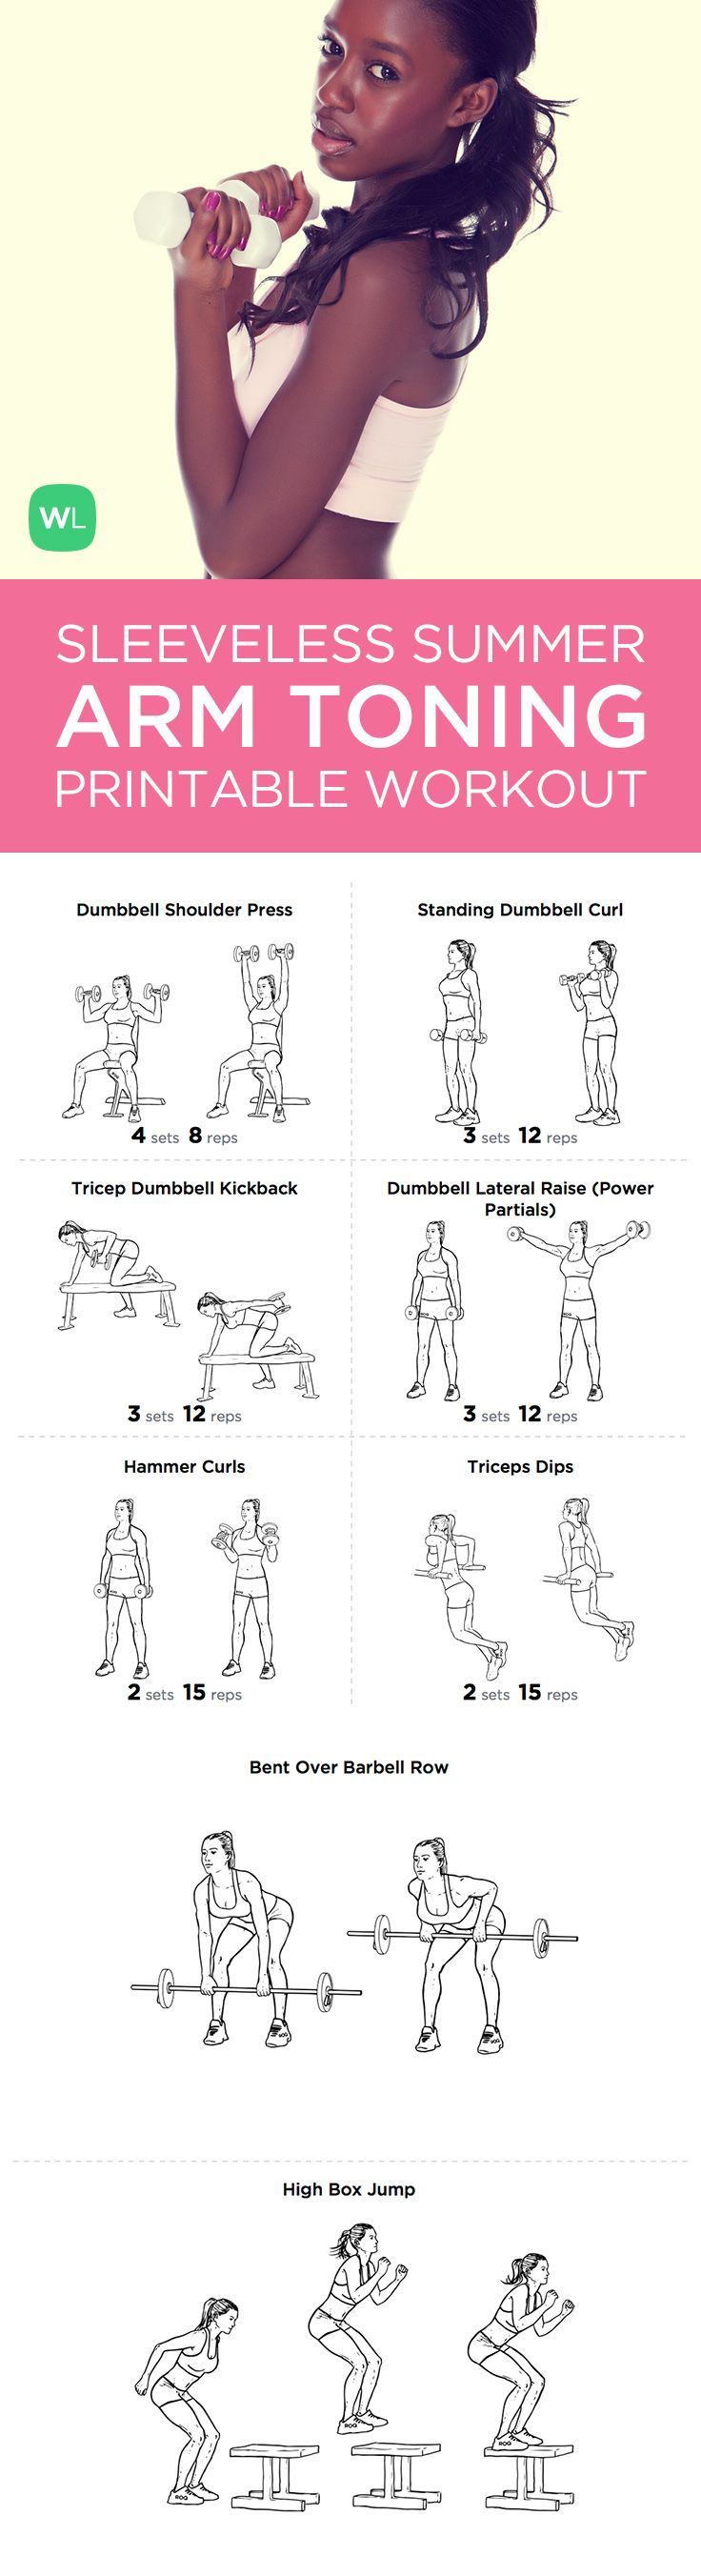 15-minute Summer Sleeveless Arms Toning printable workout with exercise illustra